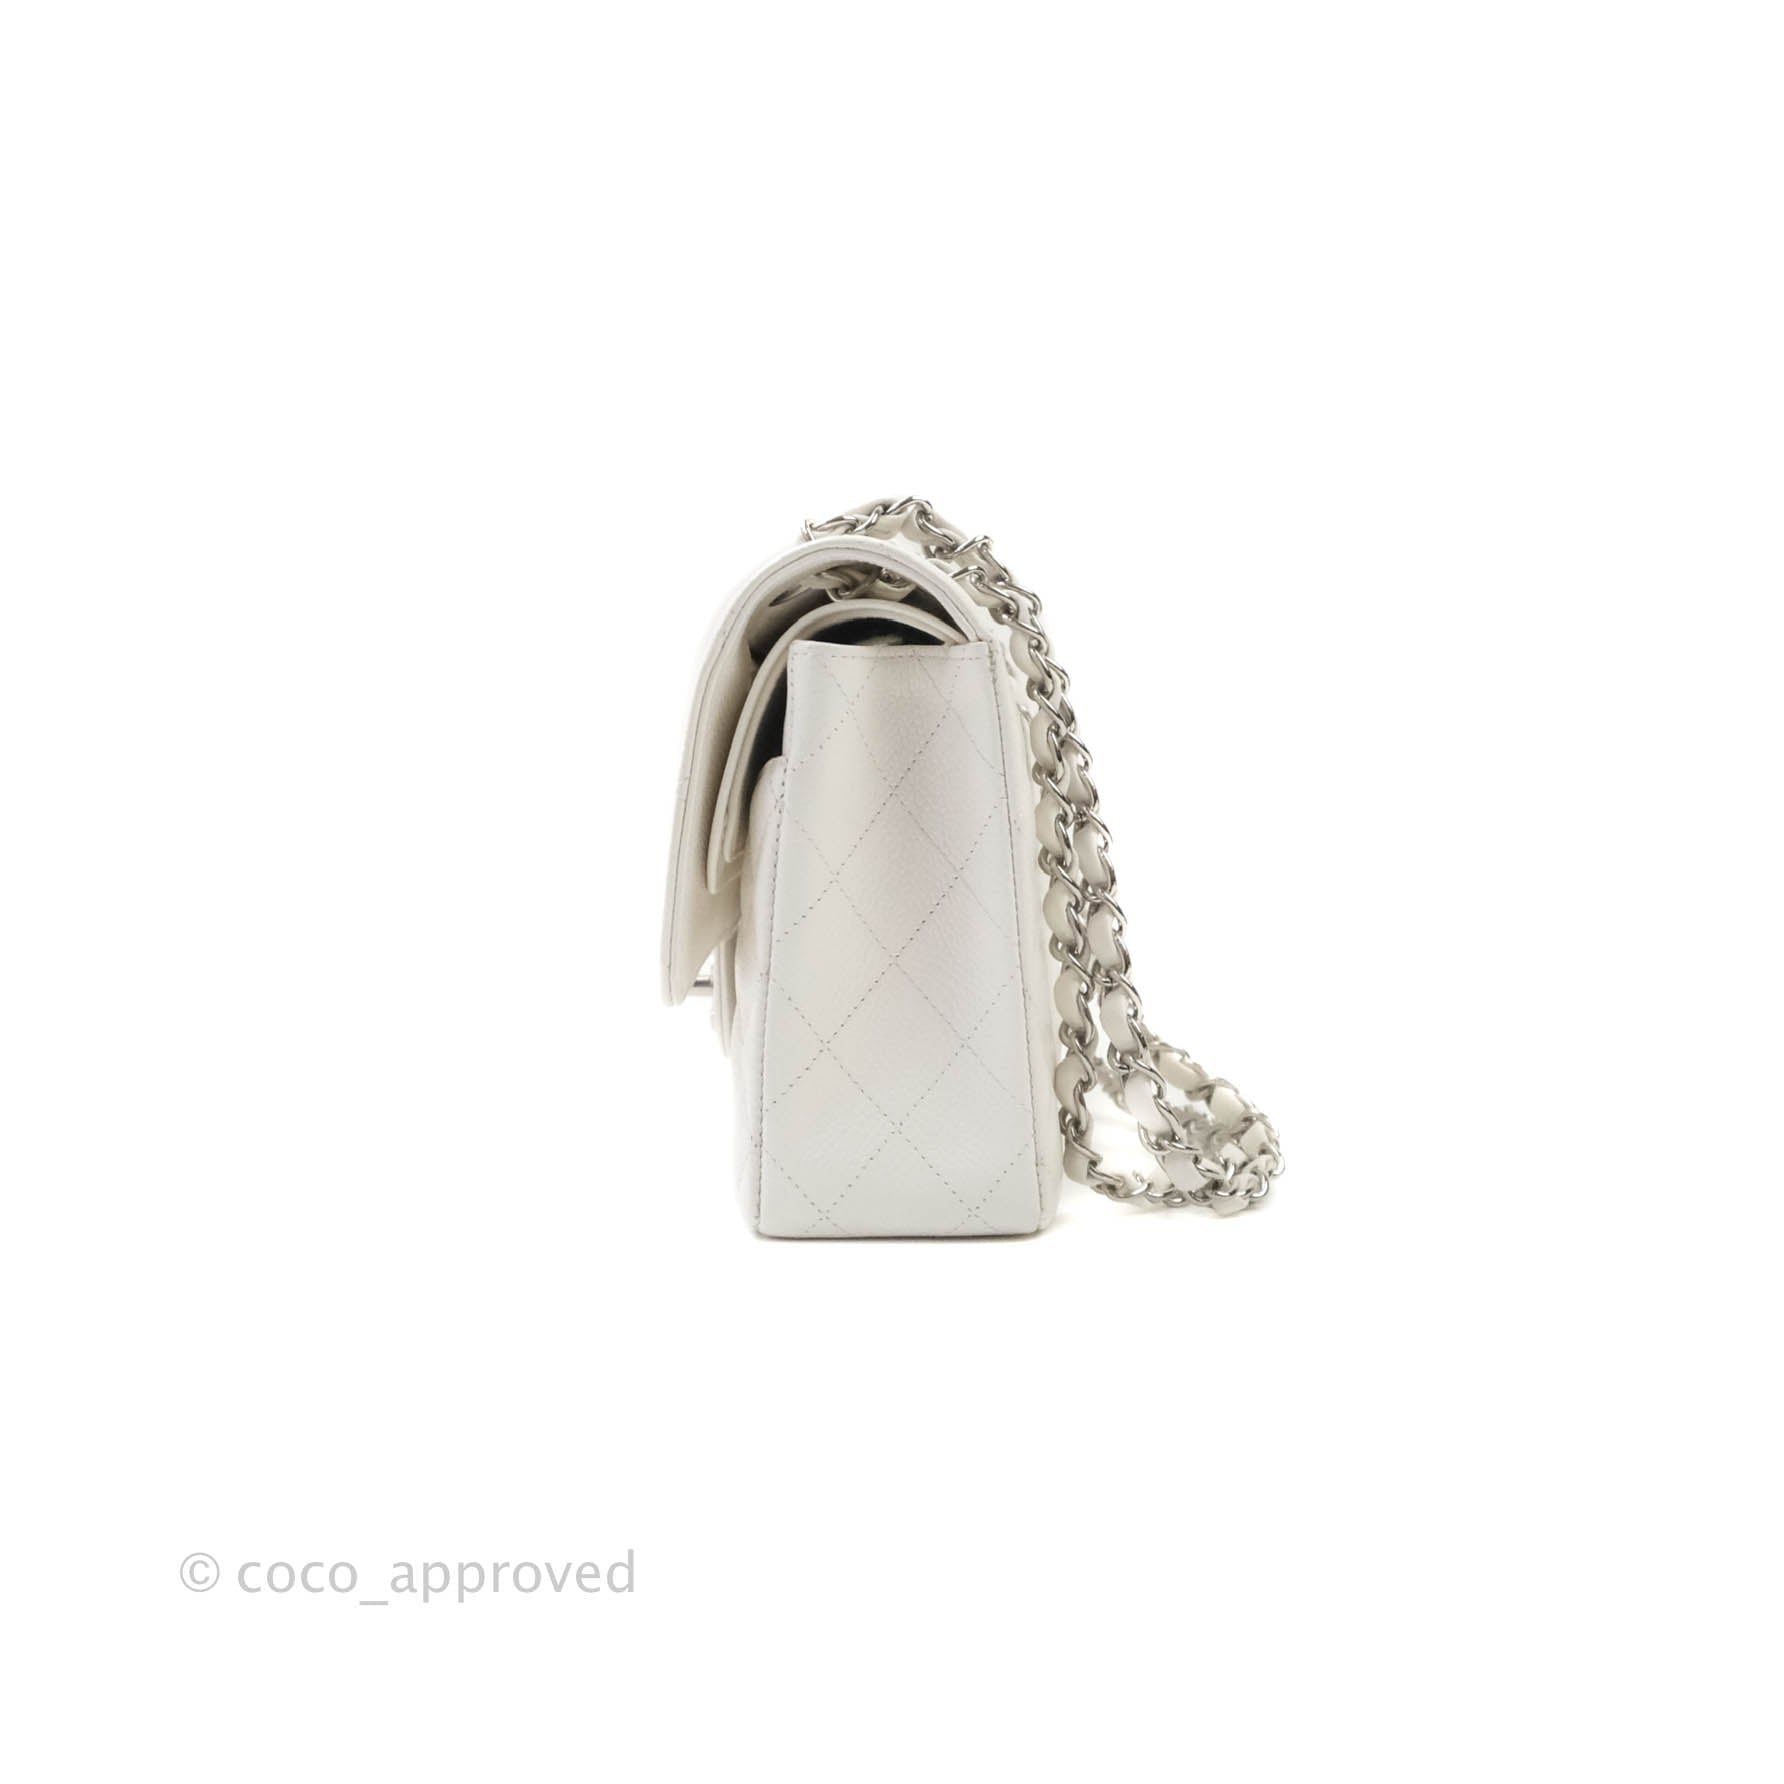 A WHITE CAVIAR LEATHER MEDIUM DOUBLE FLAP BAG WITH SILVER HARDWARE, CHANEL,  2005-2006